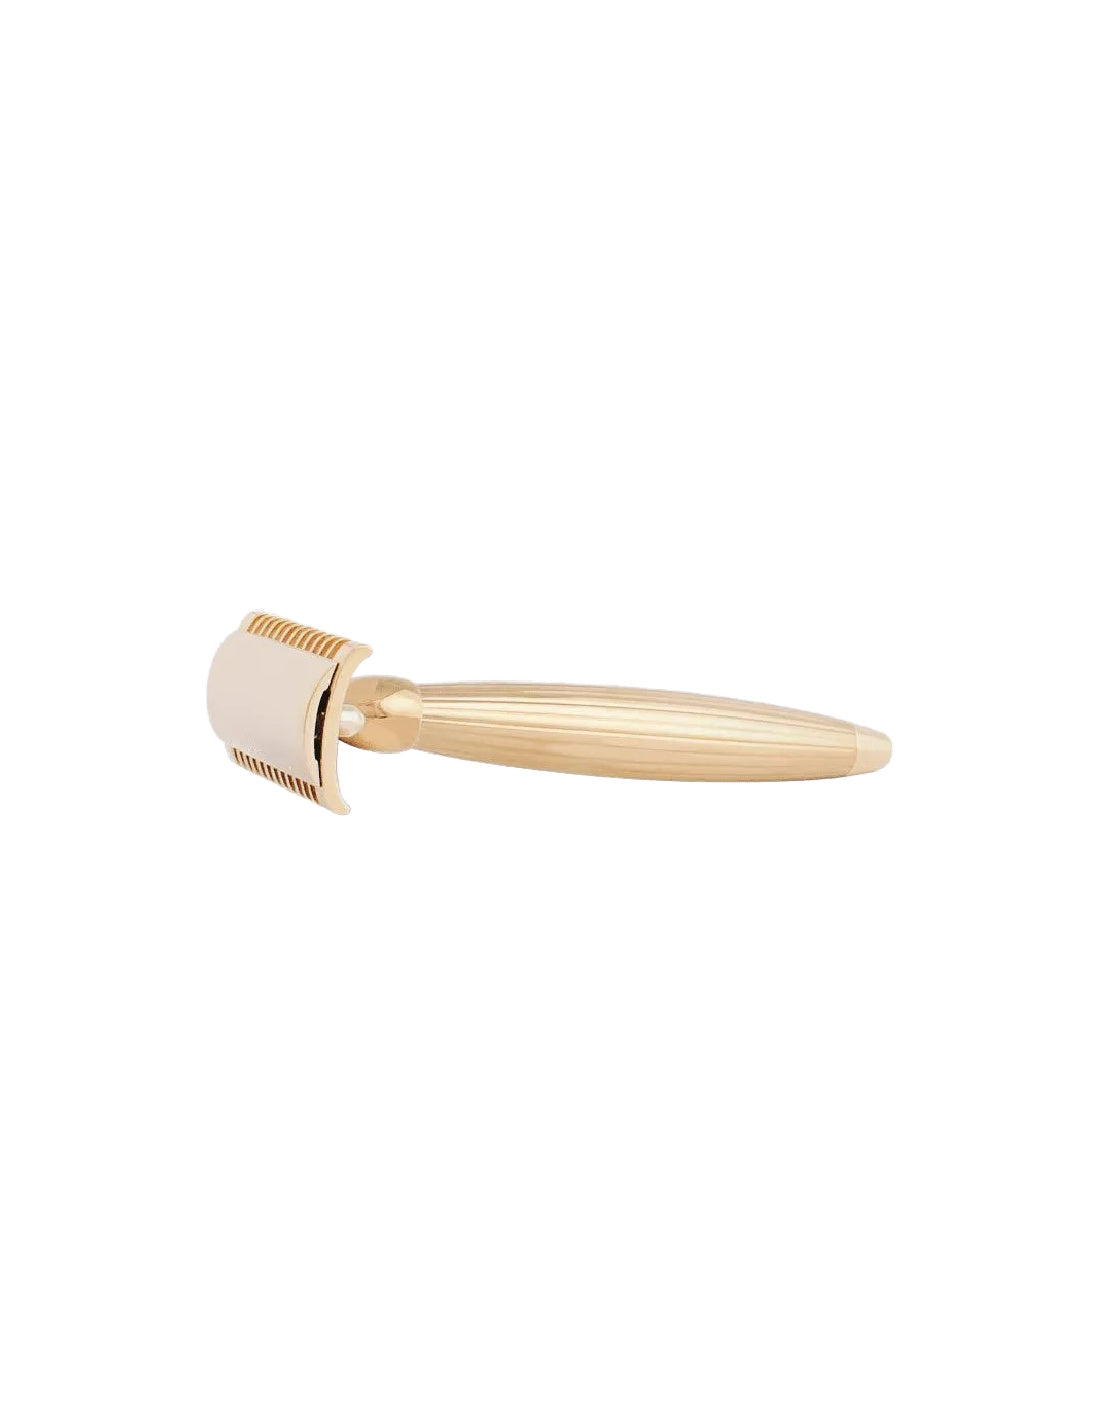 Plisson 1808 Godroon Gold Plated Razor - Mach3 or Safety